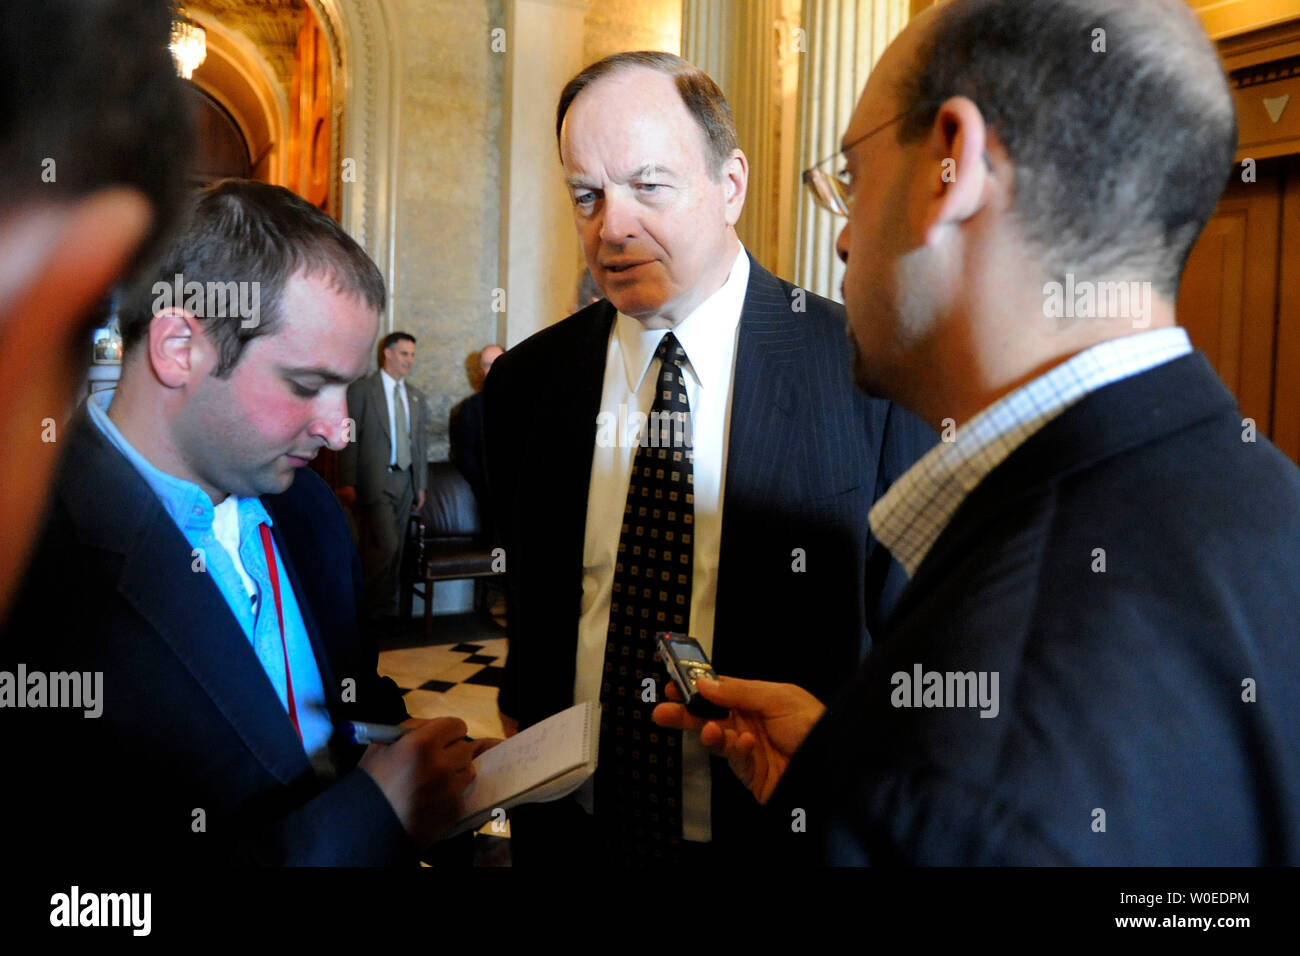 Sen. Richard Shelby (R-AL) talks to members of the media following a Senate vote on the Housing reform bill in the Capitol Building in Washington on July 26, 2008. The bill, which passed today, helped to stabilize Fannie Mae and Freddie Mac as well as restructured the FHA. (UPI Photo/Kevin Dietsch) Stock Photo